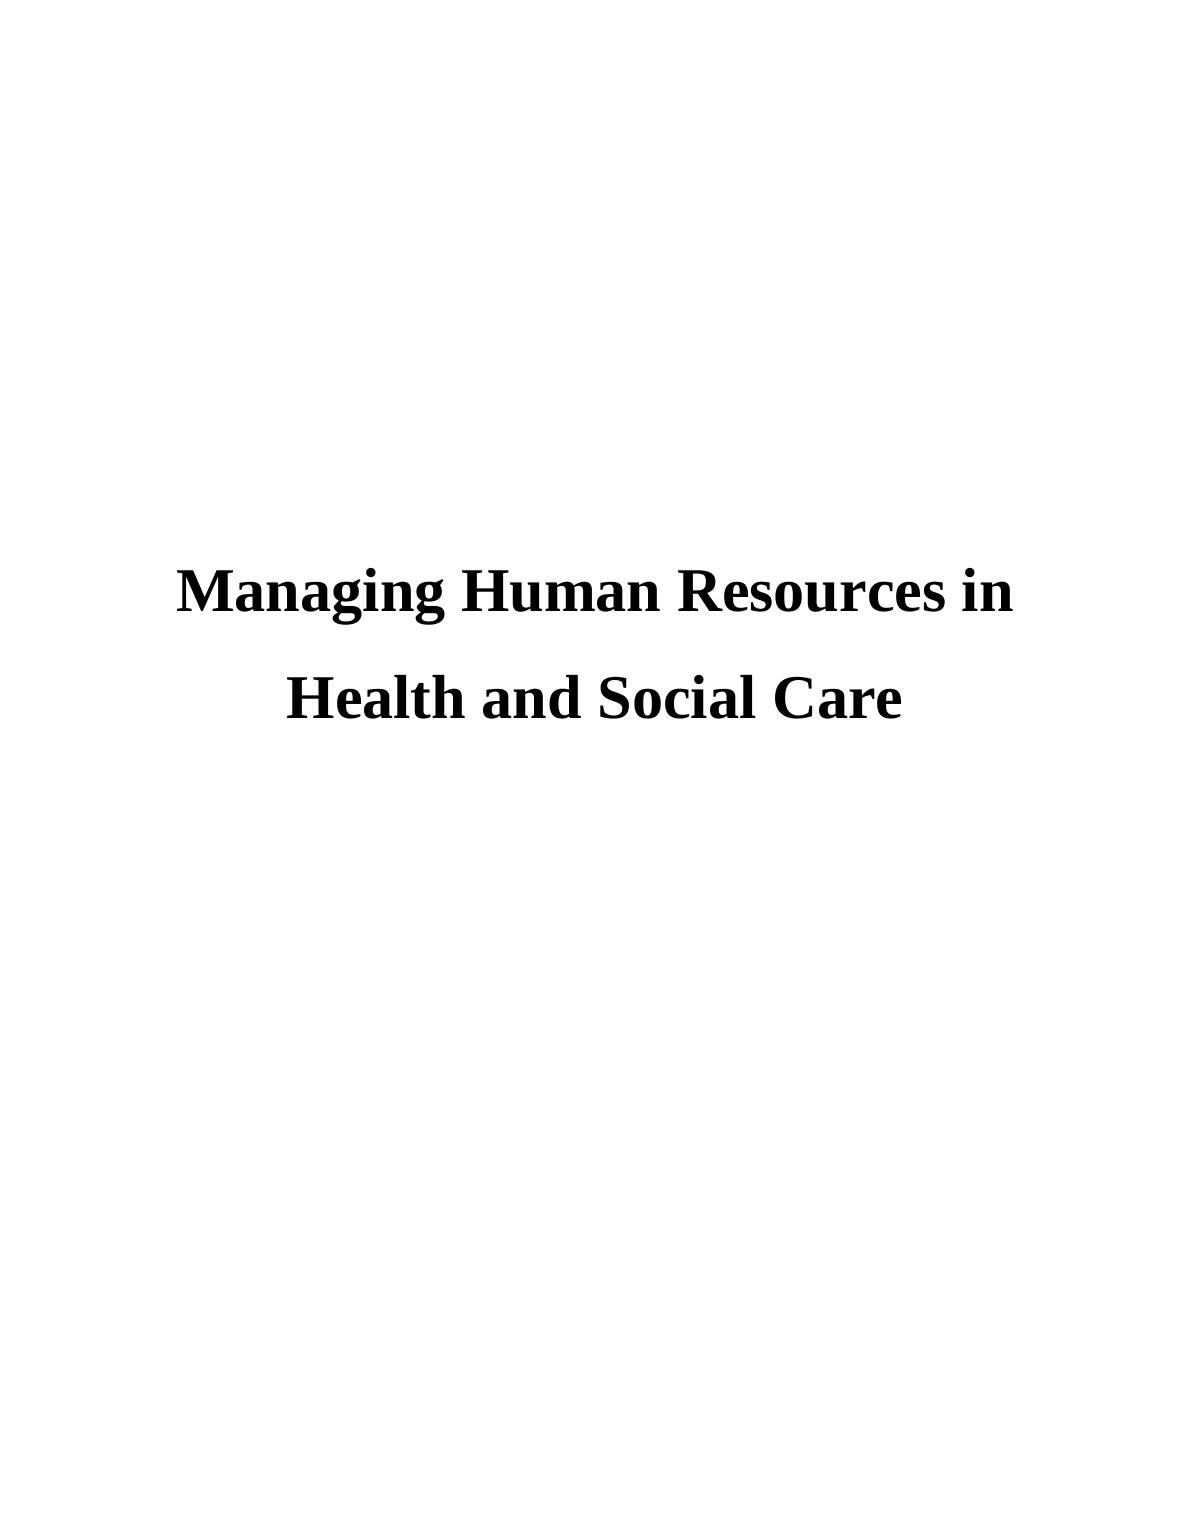 Human Resource in Social and Healthcare Sector of St-Margaret's Nursing Home : Report_1